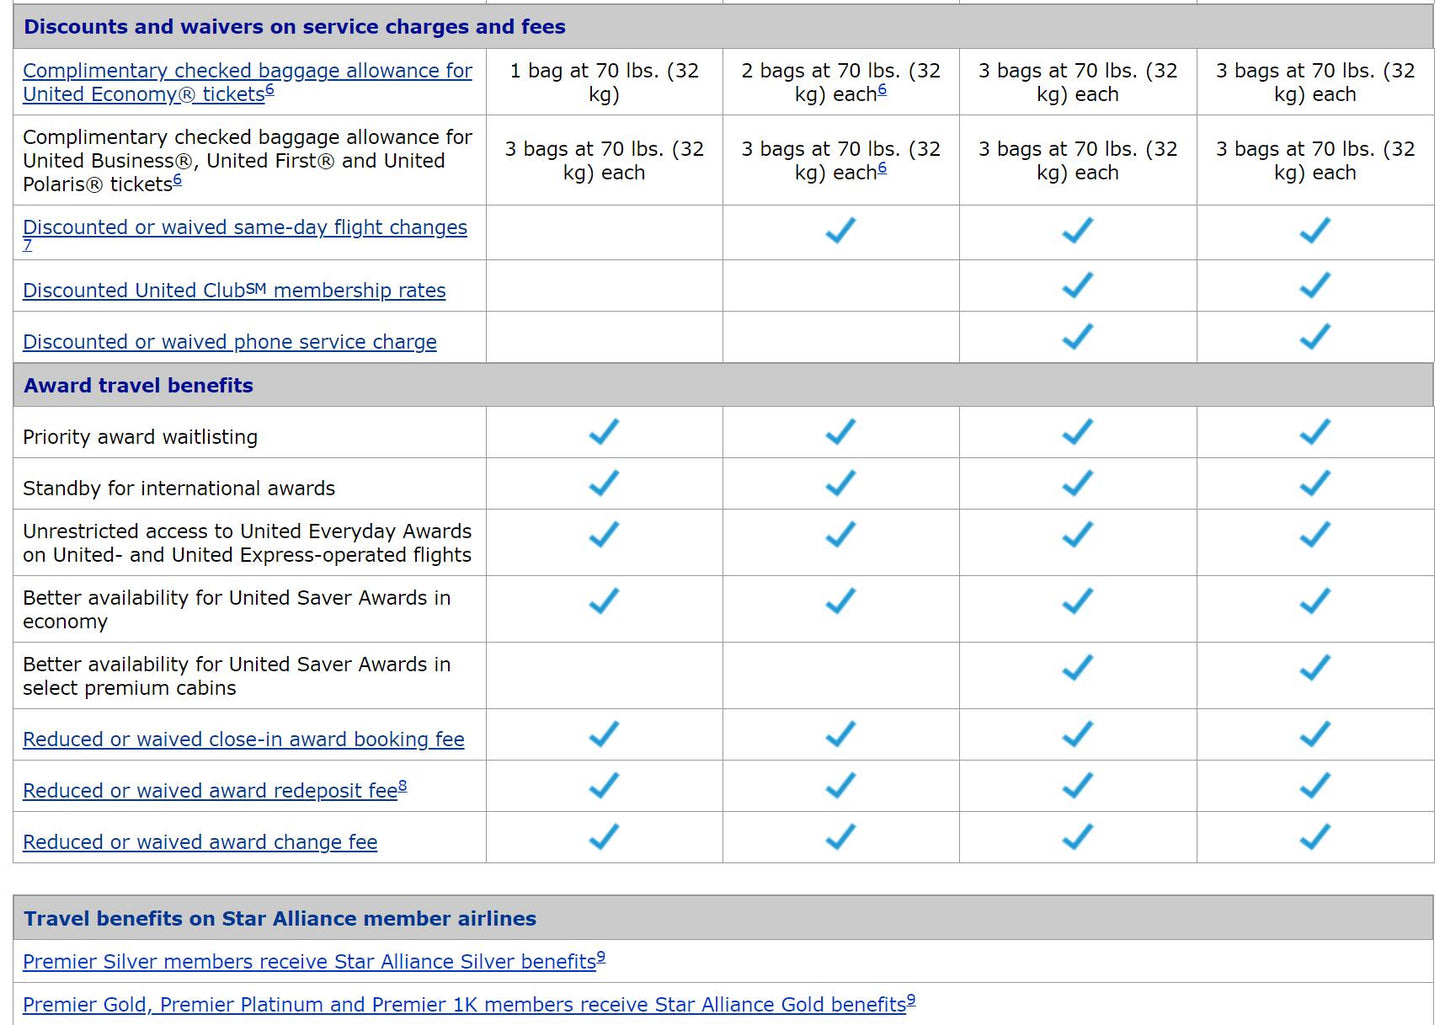 United Airlines Gold Upgrade Star Alliance Gold